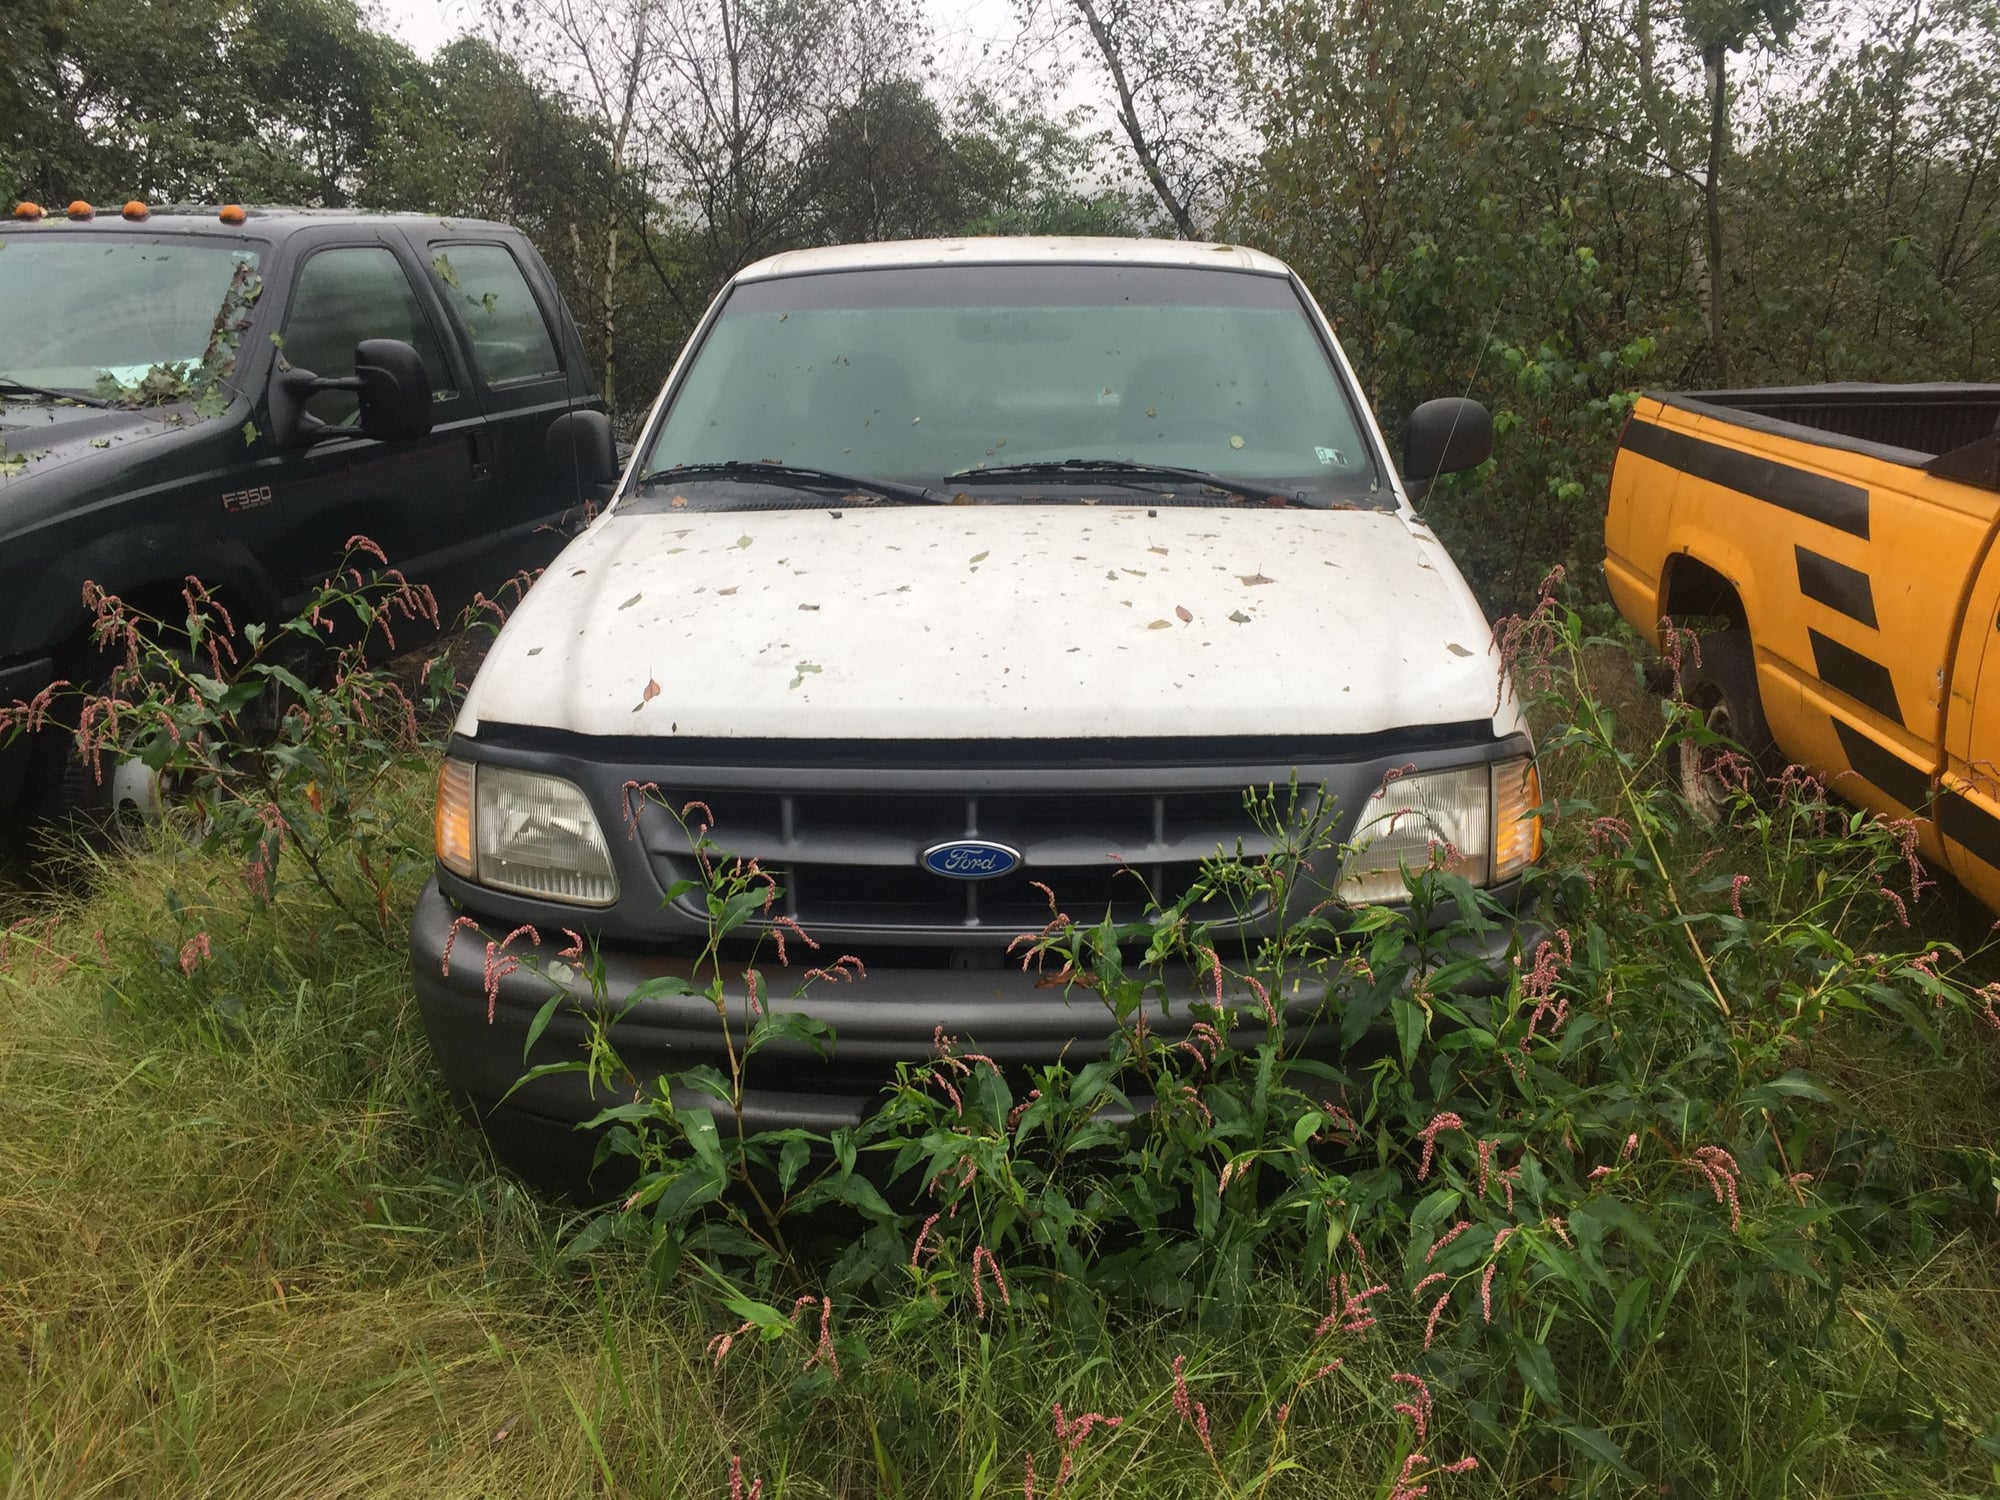 1998 Ford F-150 - 98 F150 FOR PARTS OR REPAIR NEEDS TRANNY GOOD SOLID TRUCK BLOWS COLD NO RATTLES - Used - VIN 1FTDF1721VKC95747 - 190,000 Miles - 6 cyl - 2WD - Automatic - Truck - White - Shenandoah, PA 17976, United States